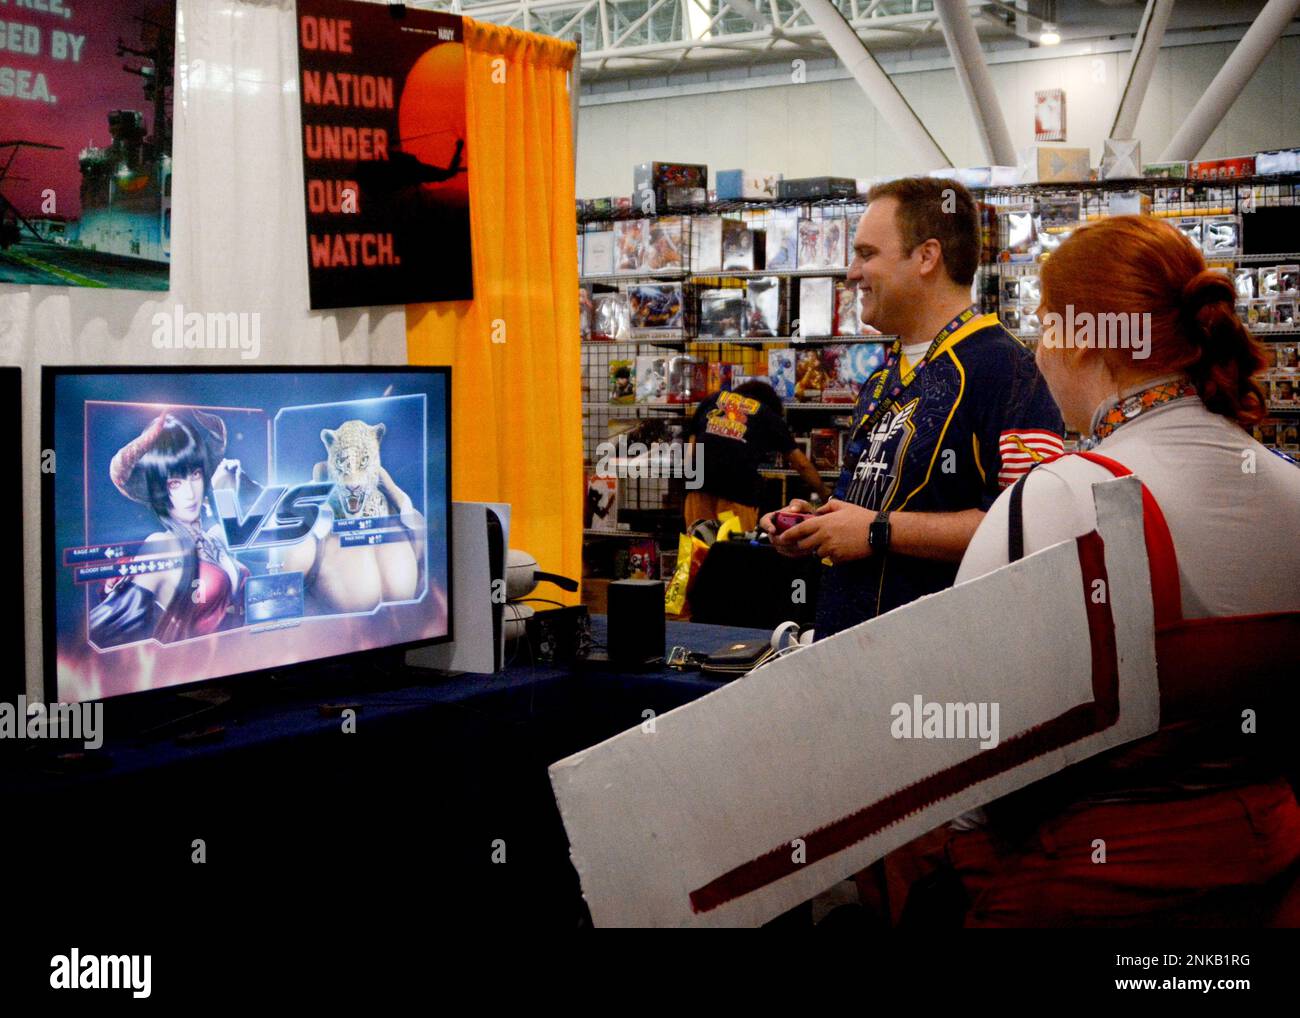 The Navy esports team Goats and Glory members,  Lt. Aaron Jones from O'Fallon, Illinois and his teammate, Information Systems Technician 1st Class Rod Camiso from Worcester, Massachusetts, interact with guests at the Boston FanExpo Aug. 12-14, 2022.  The esports team members help answer questions on naval career and education opportunities through their online streaming platform. Stock Photo